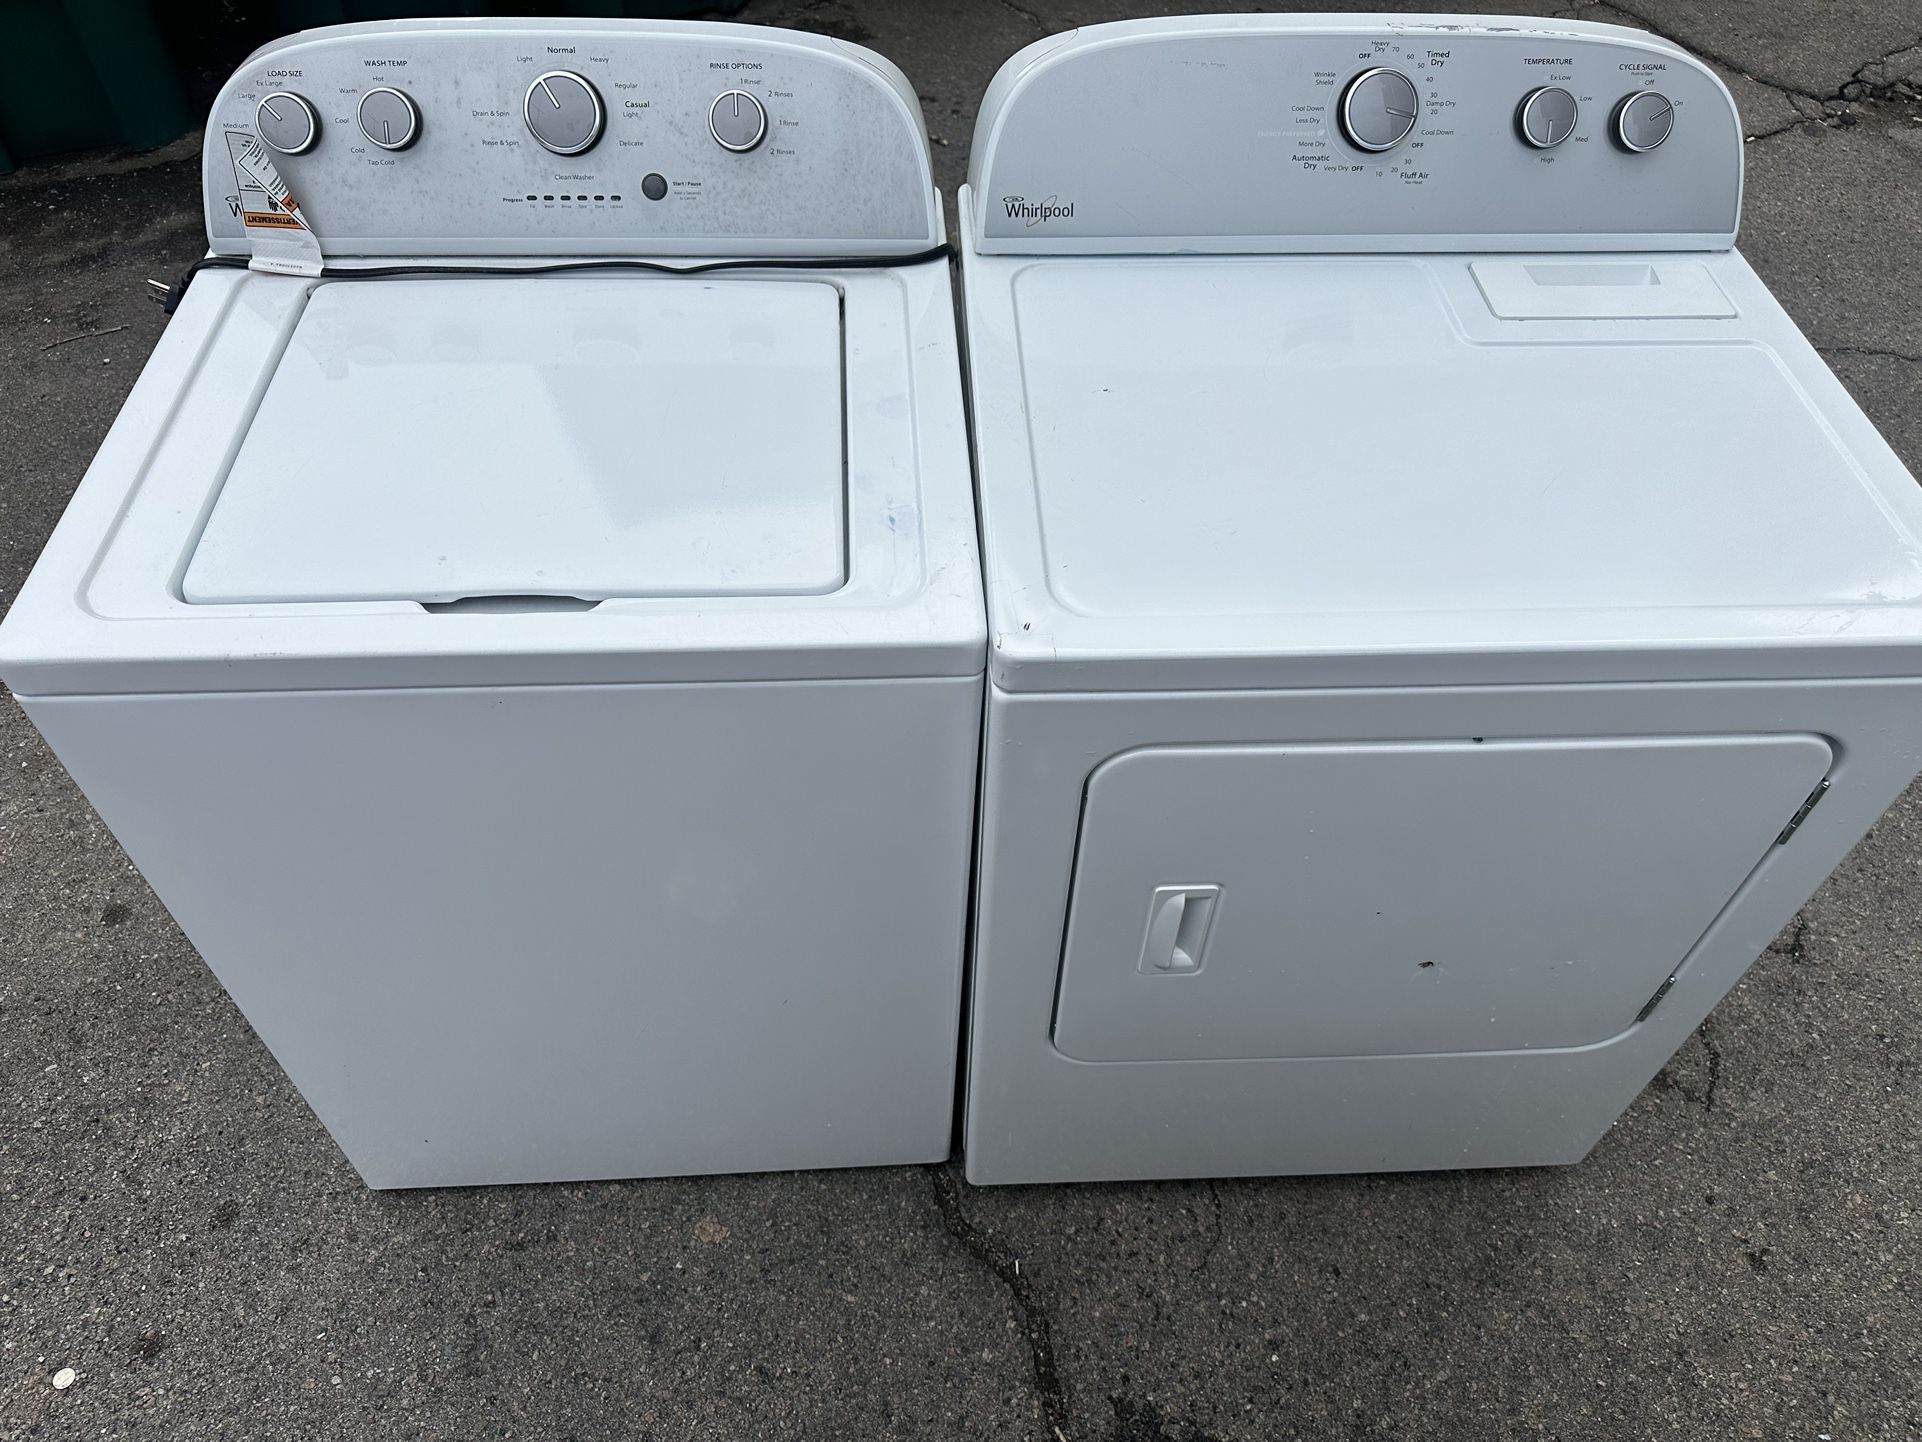 Whirlpool Washing And dryer Set (delivery Available 